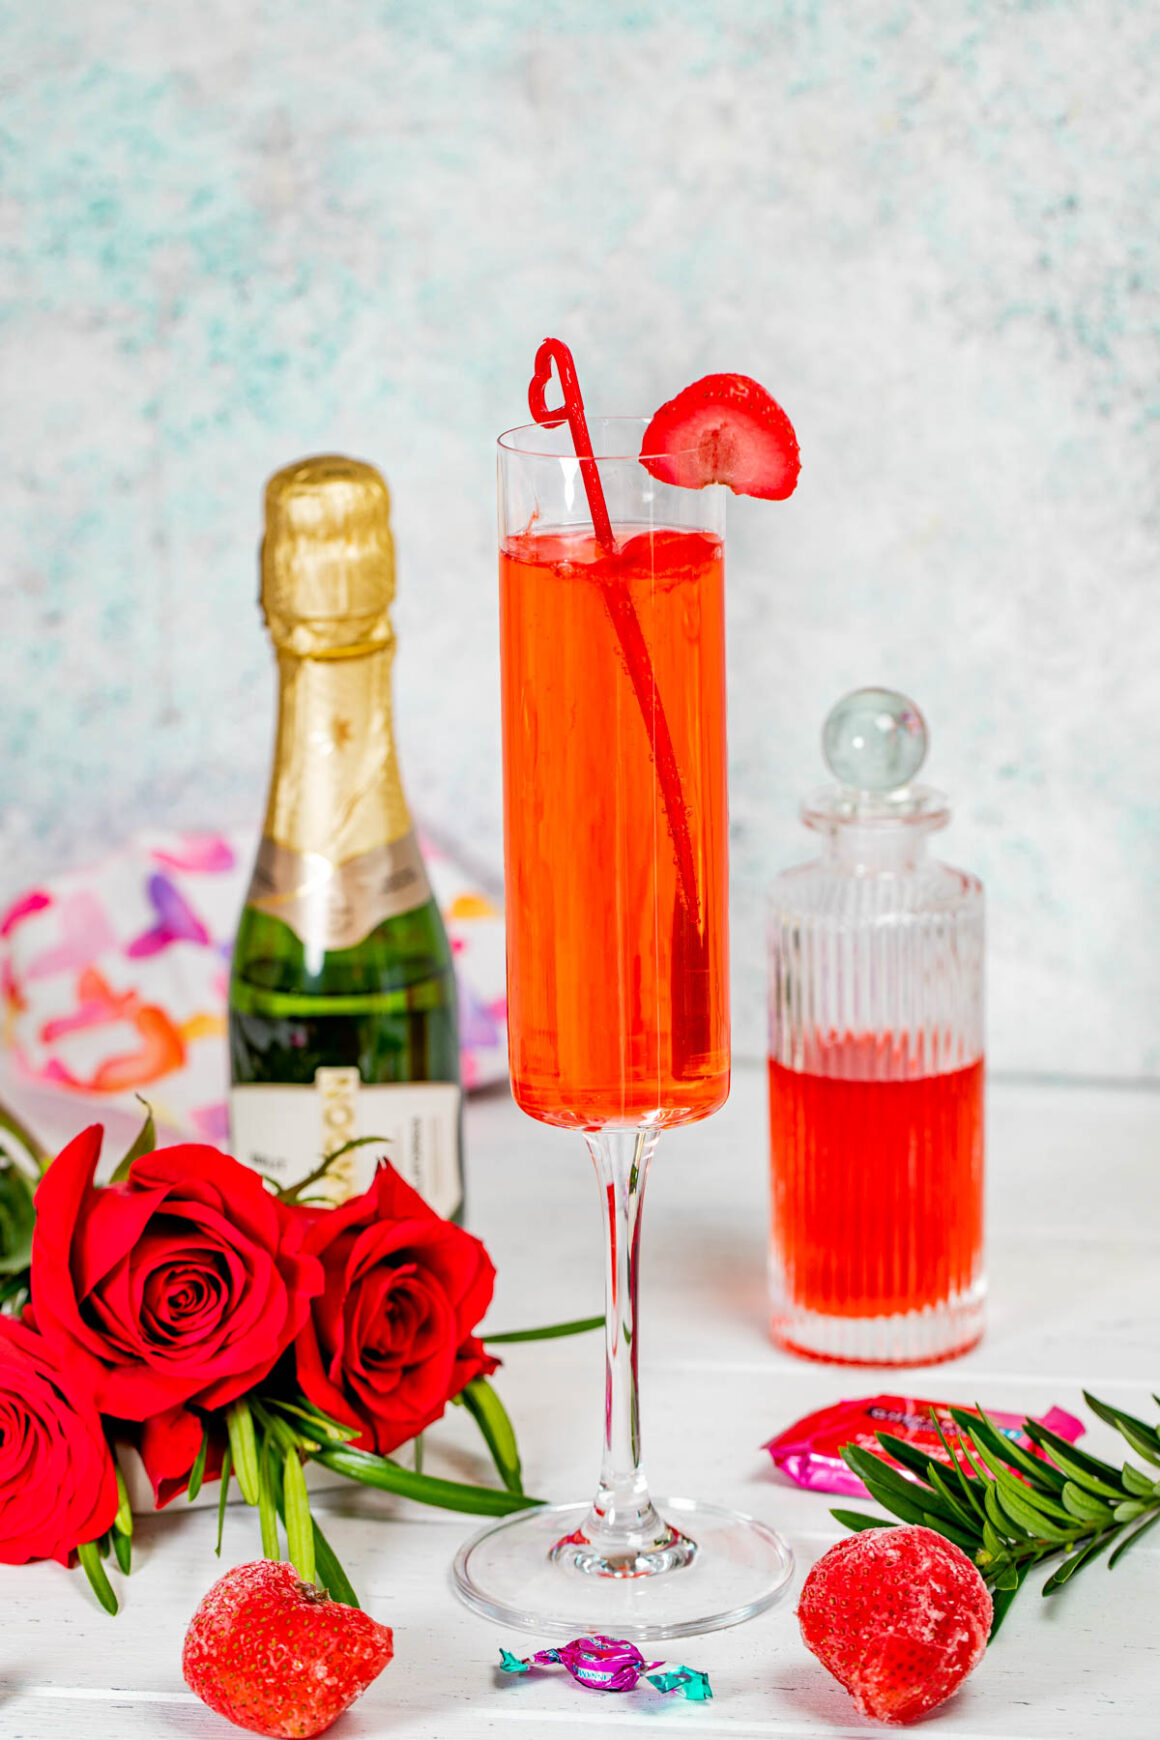 strawberry crush cocktail served into a champagne glass, garnish with a strawberry sliced